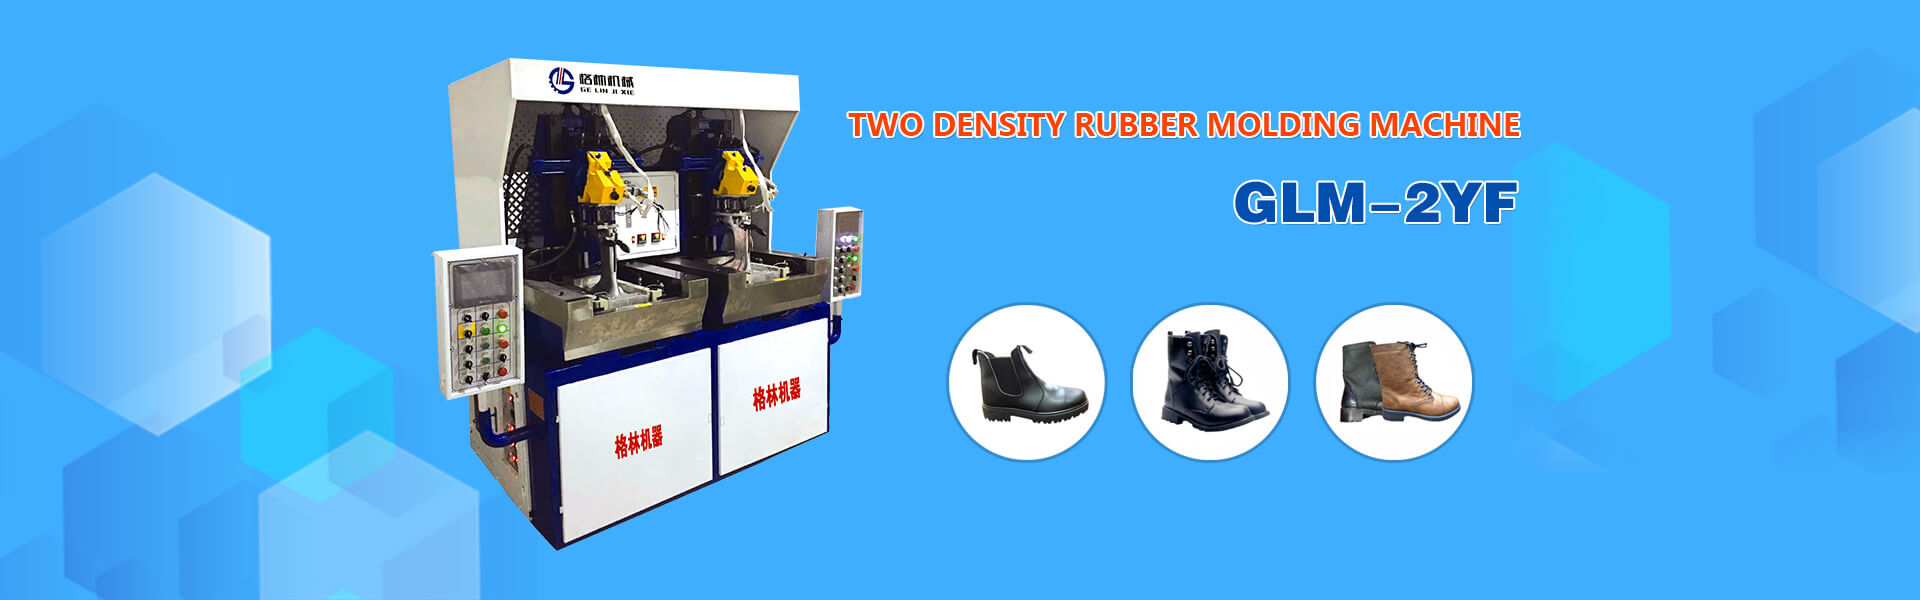 Two Density Rubber Molding Machine